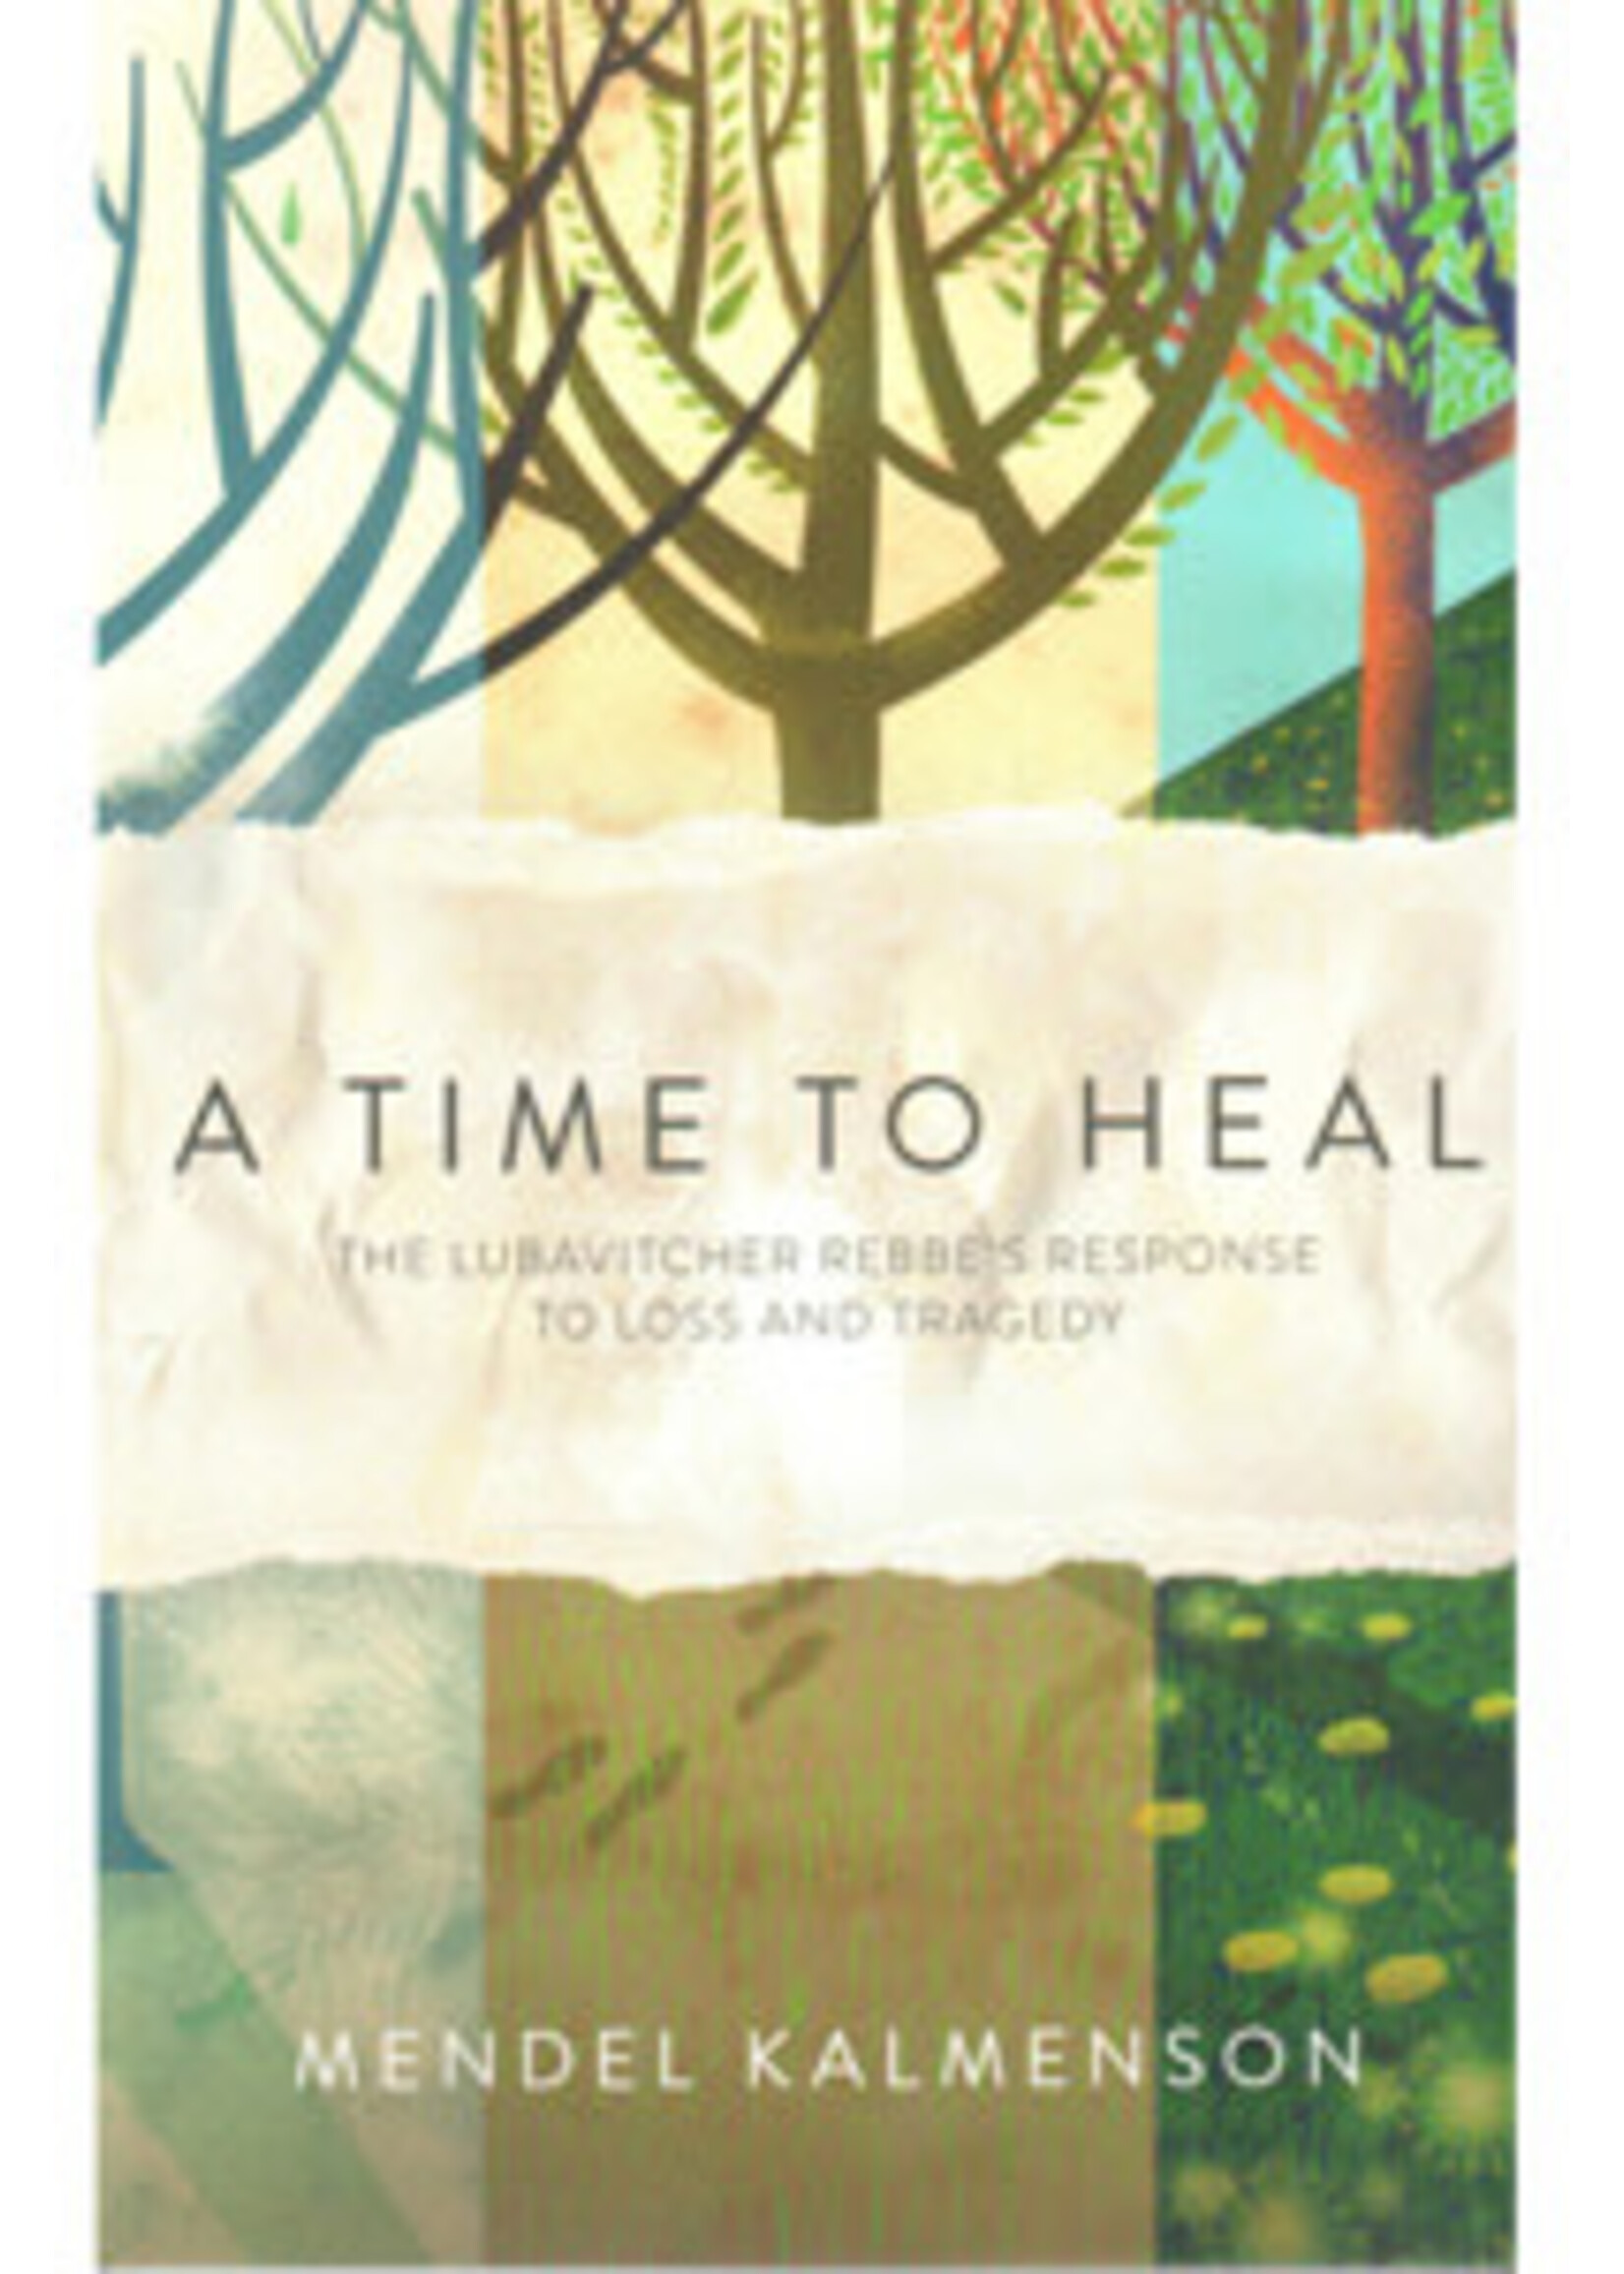 A TIME TO HEAL- LOSS & TRAGEDY